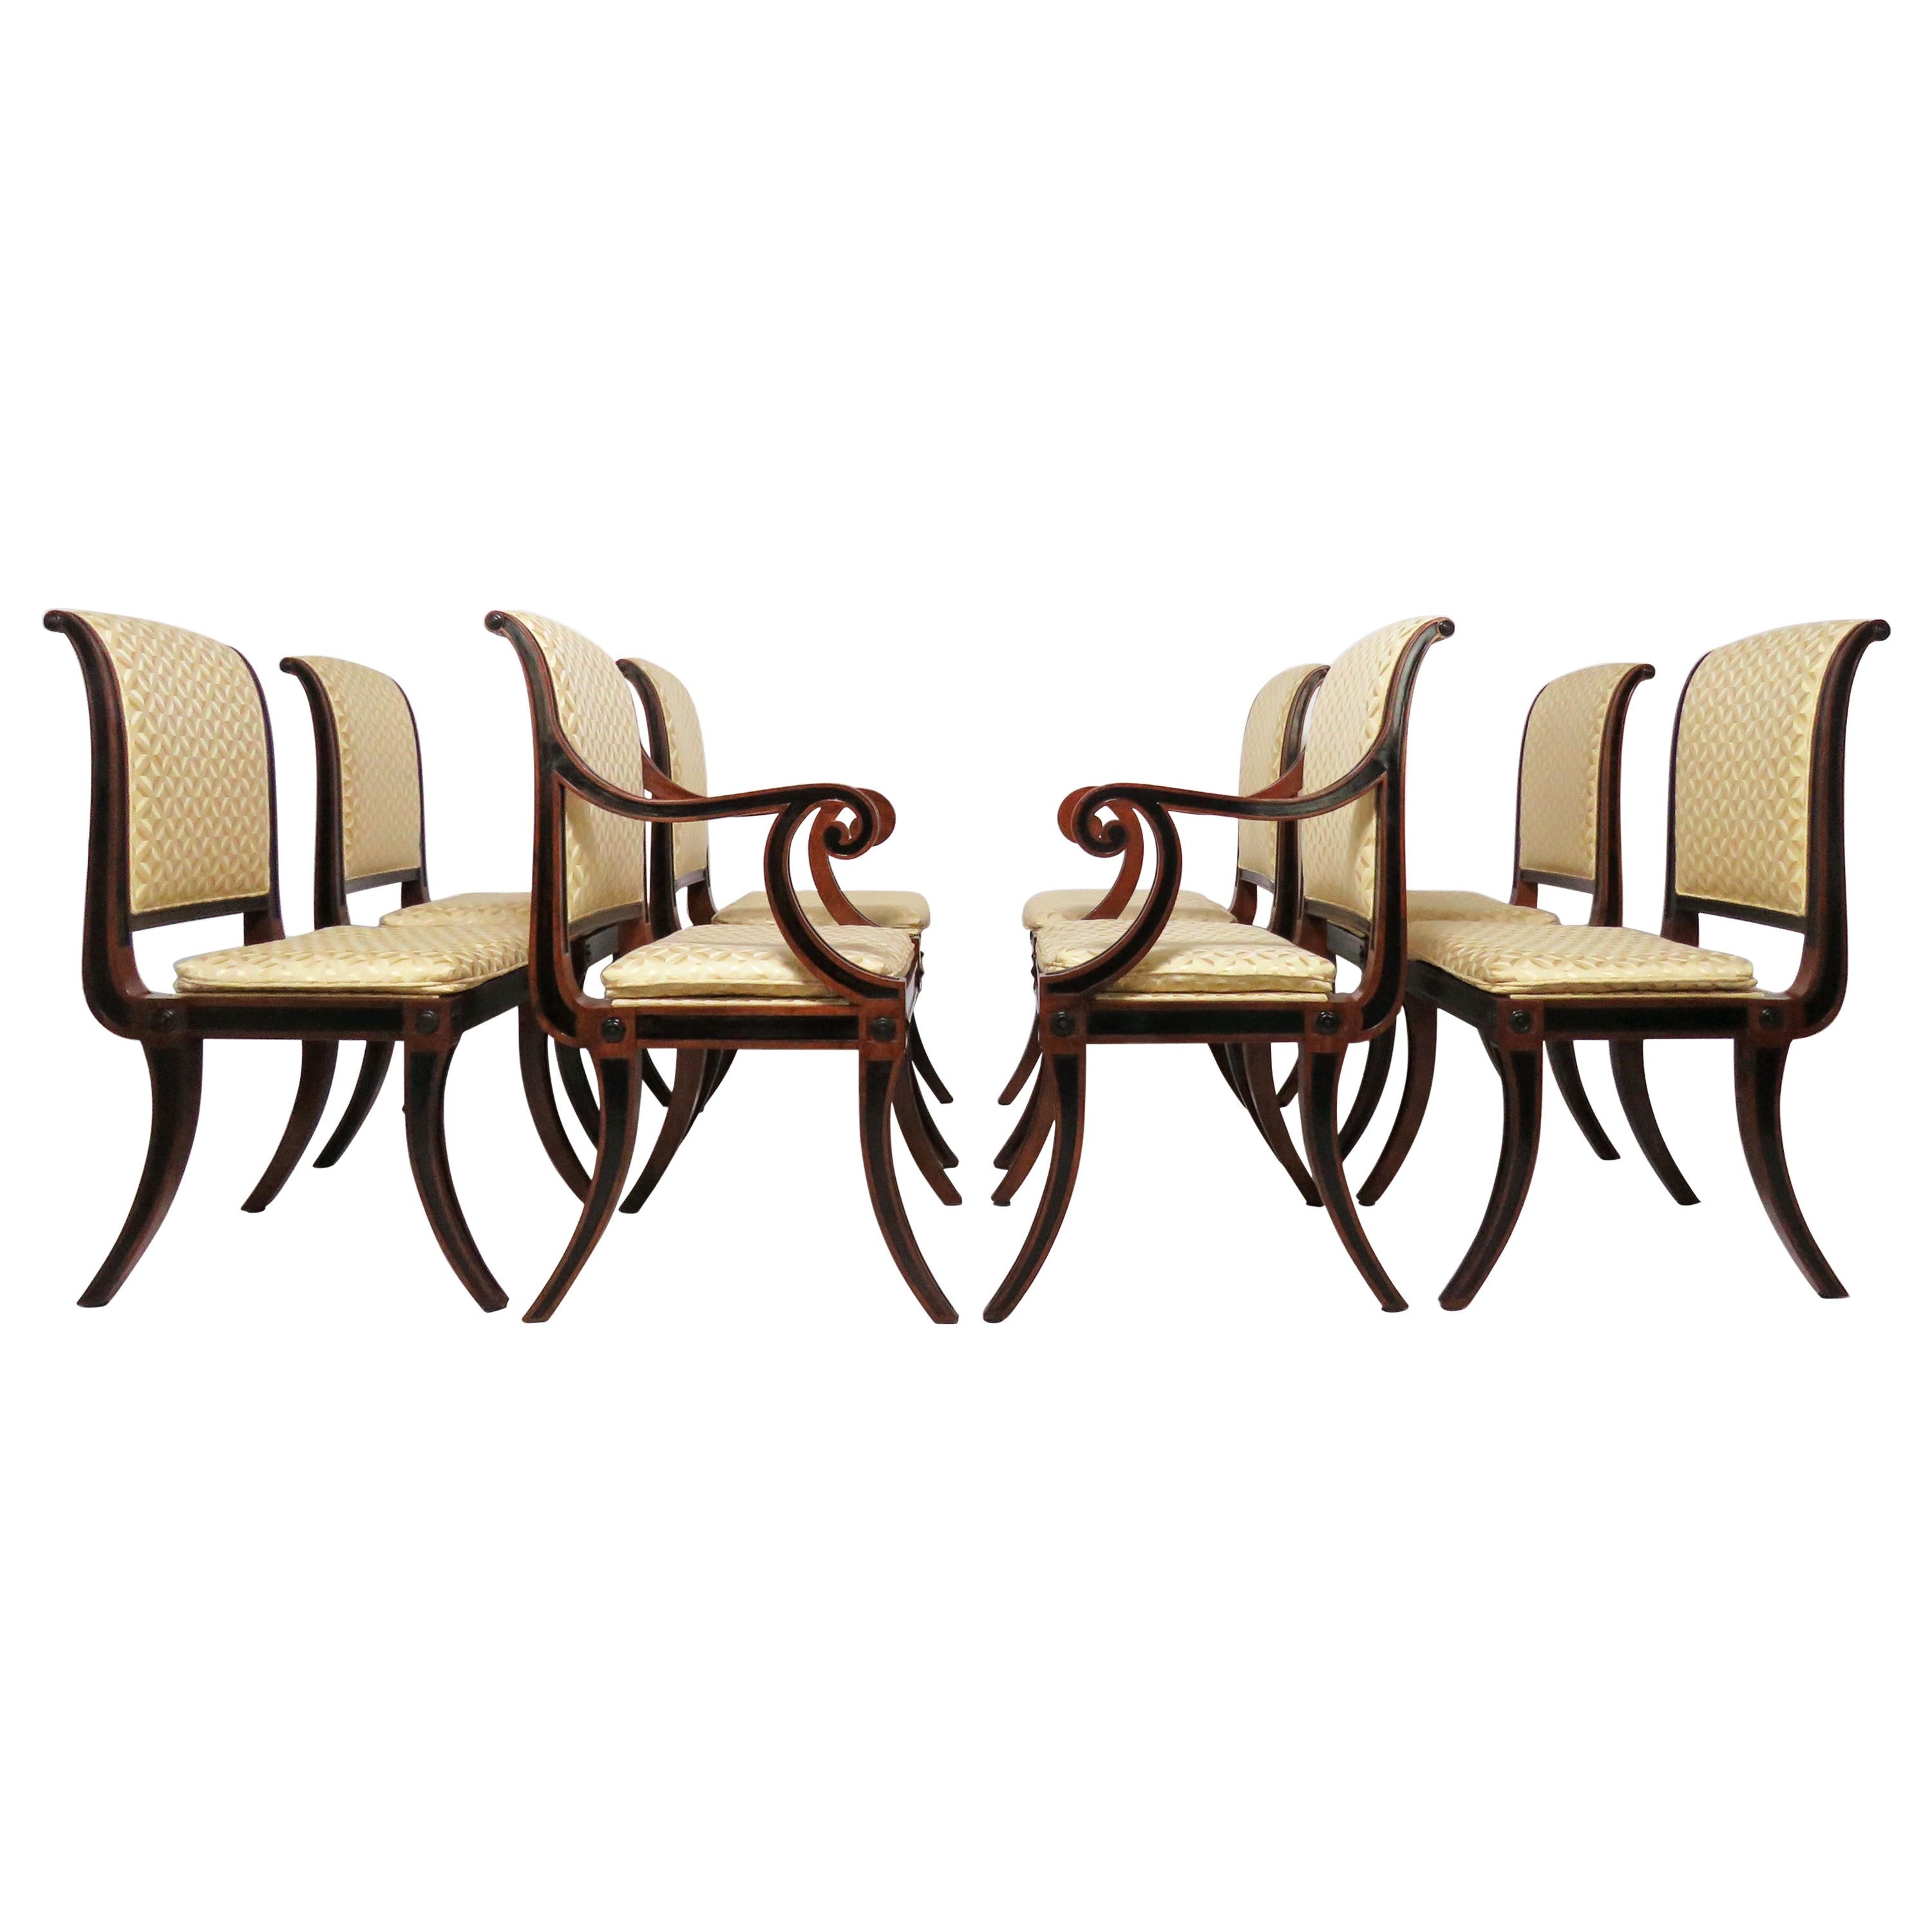 Set of Eight Baker Furniture Regency Dining Chairs with Klismos Legs